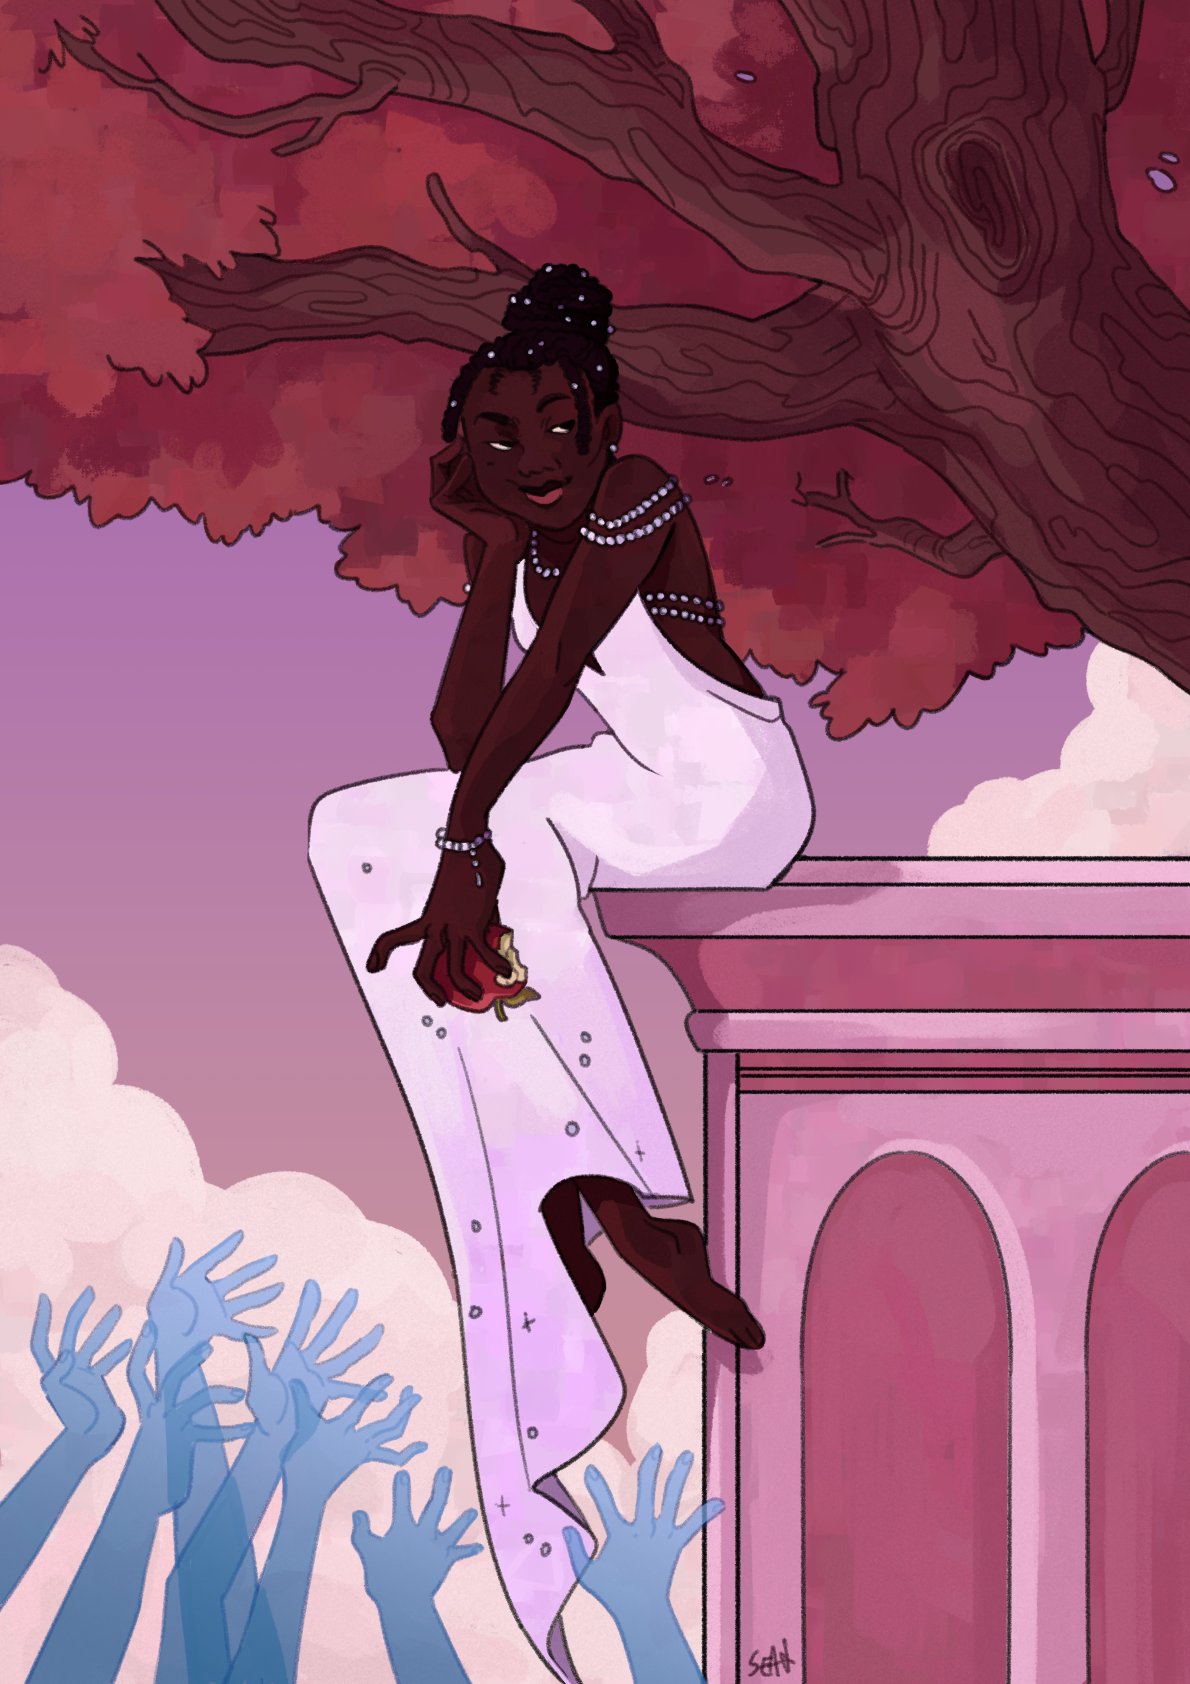 A digital drawing of a thin, dark-skinned Black woman sitting with her legs crossed on the edge of a pink stone plinth. She is holding a half-eaten apple in one hand and resting her head in the other, smirking slightly. She is wearing a white backless gown and pearl jewelry, and her hair is pulled into a bun and decorated with pearls. Below her, the ghostly blue hands of the dead reach up towards her feet.